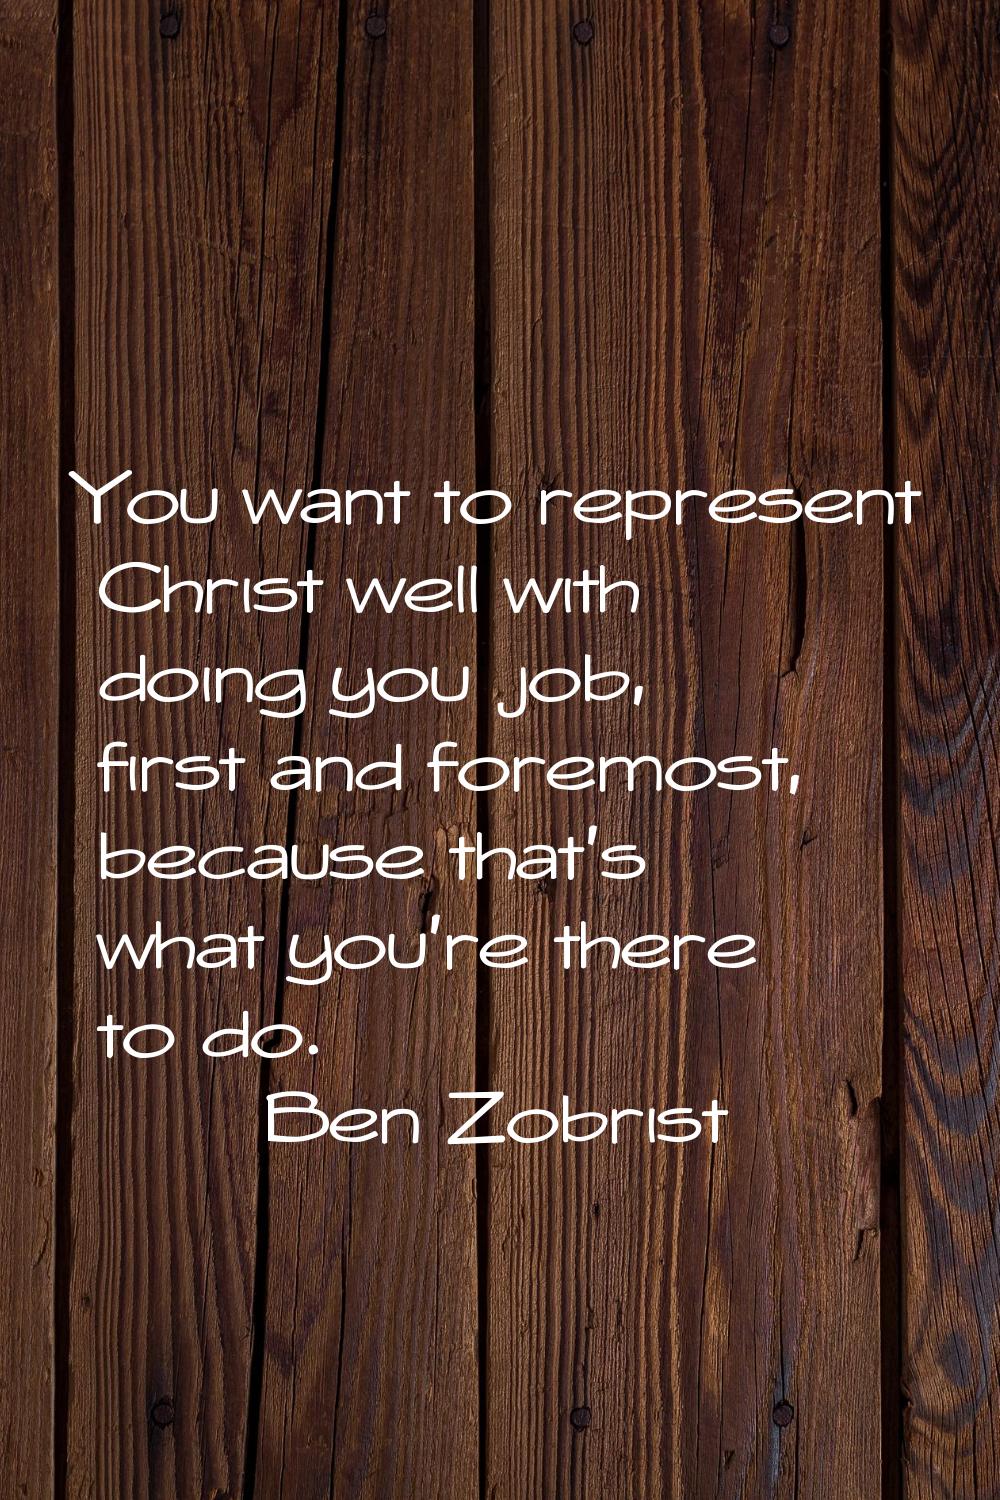 You want to represent Christ well with doing you job, first and foremost, because that's what you'r